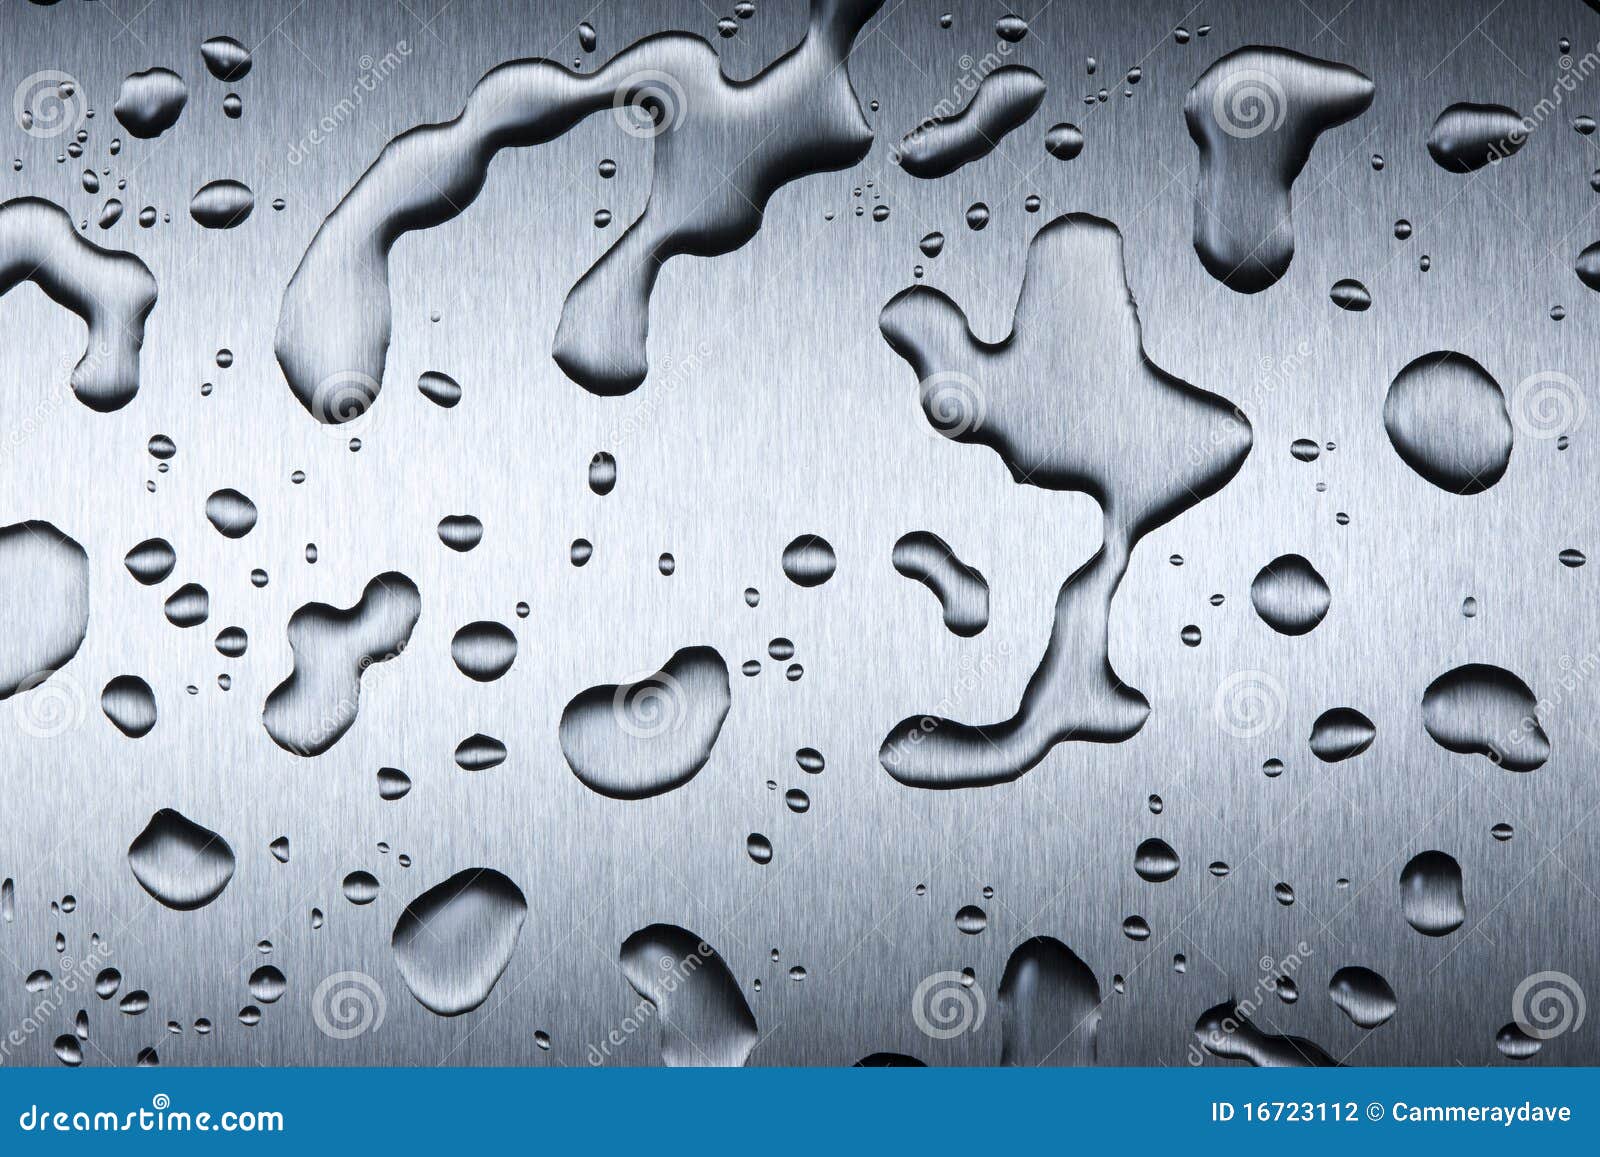 stainless steel drops water background